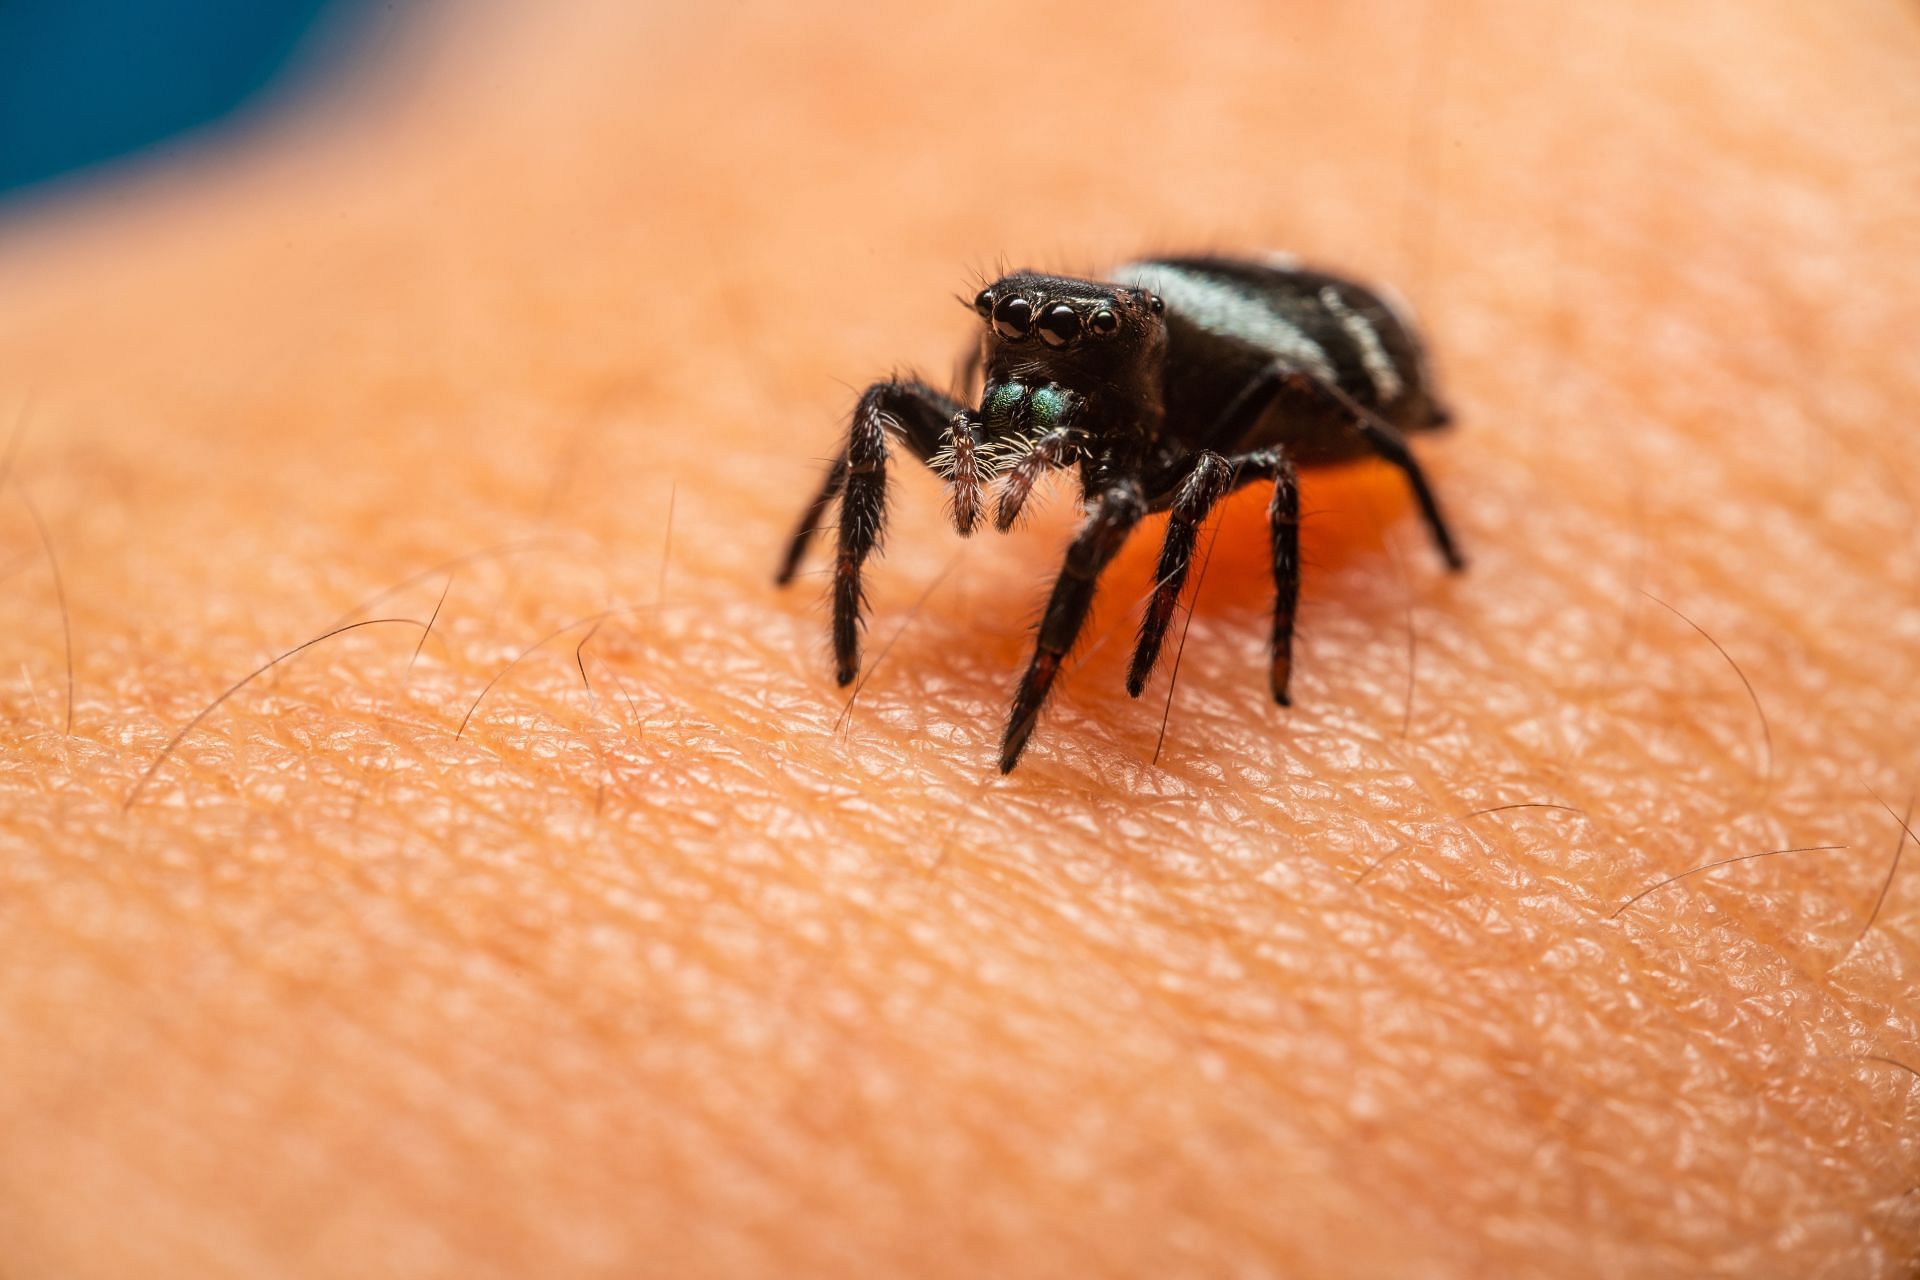 What are the symptoms of tick bite? Read on to find out. (Image via pexels/ Jimmy Chan)